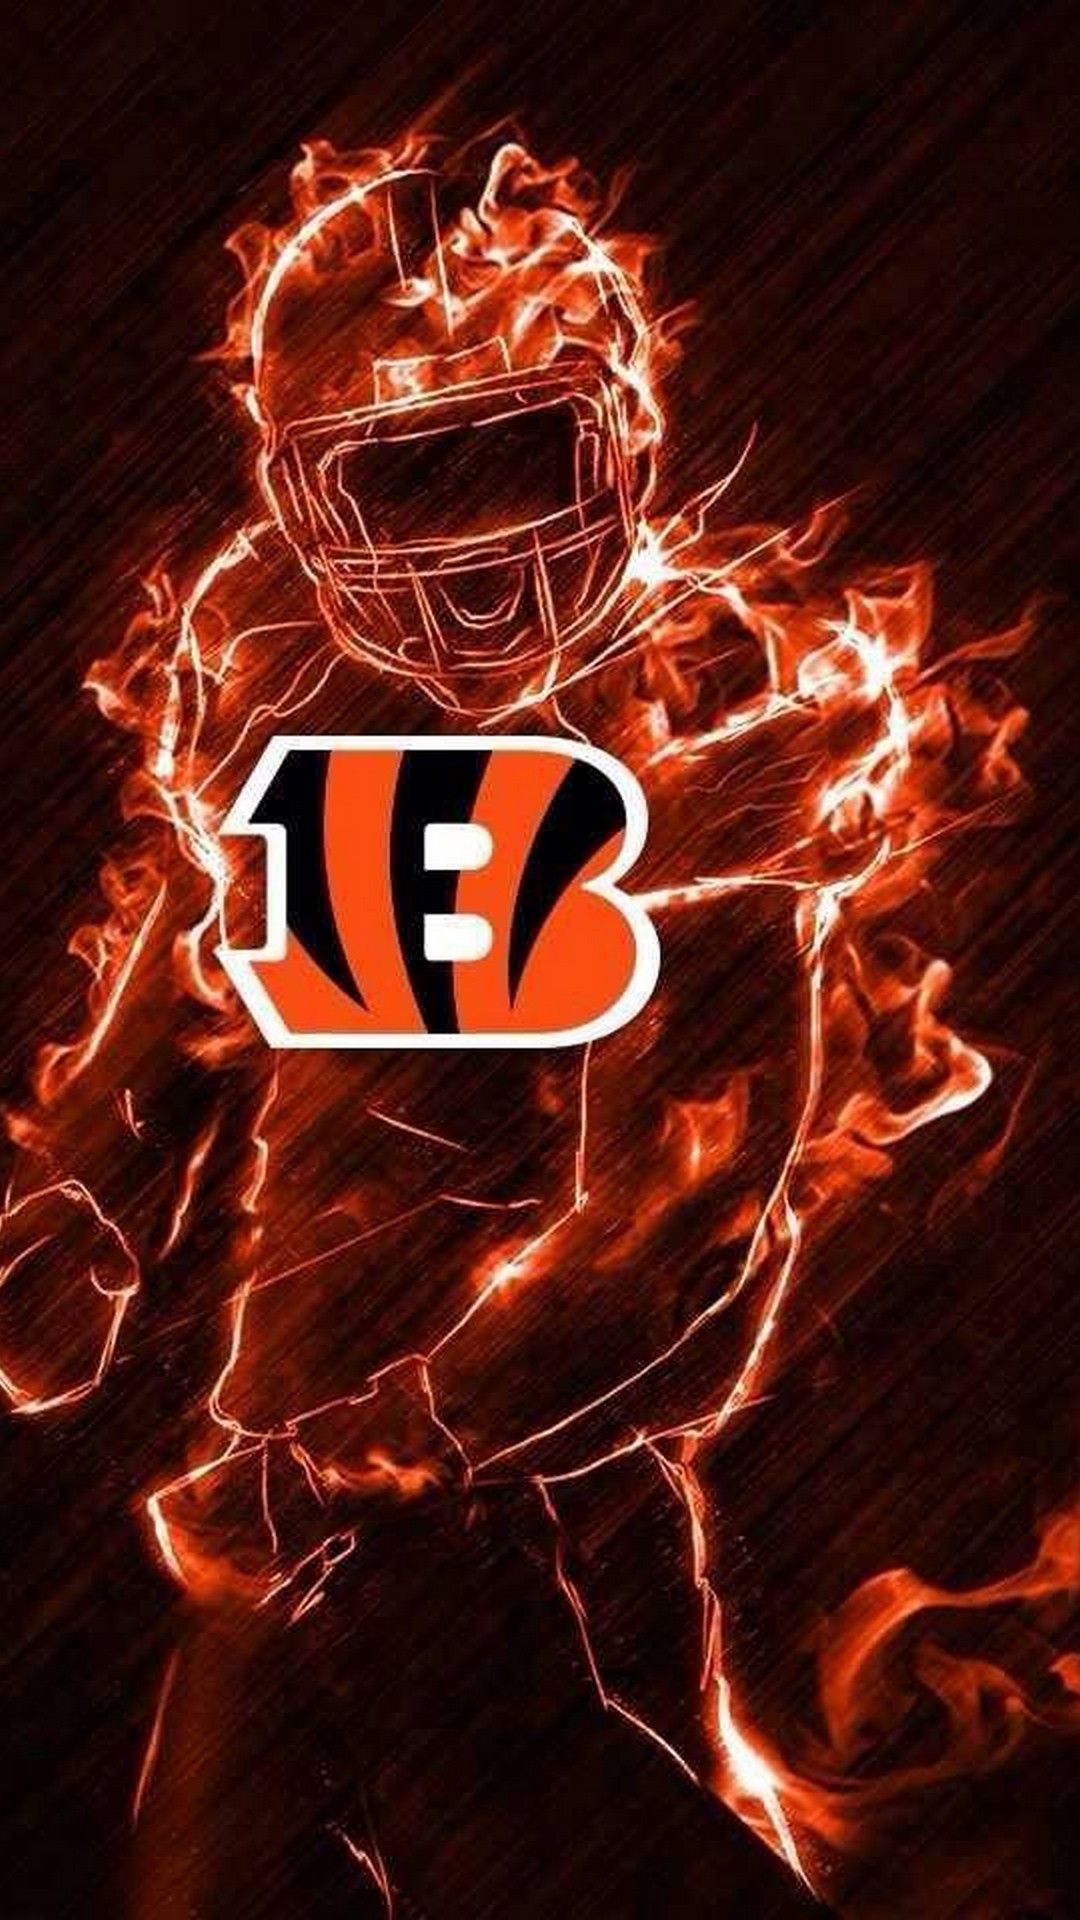 Cincinnati Bengals Wallpaper For Android posted by Ryan Johnson 1080x1920